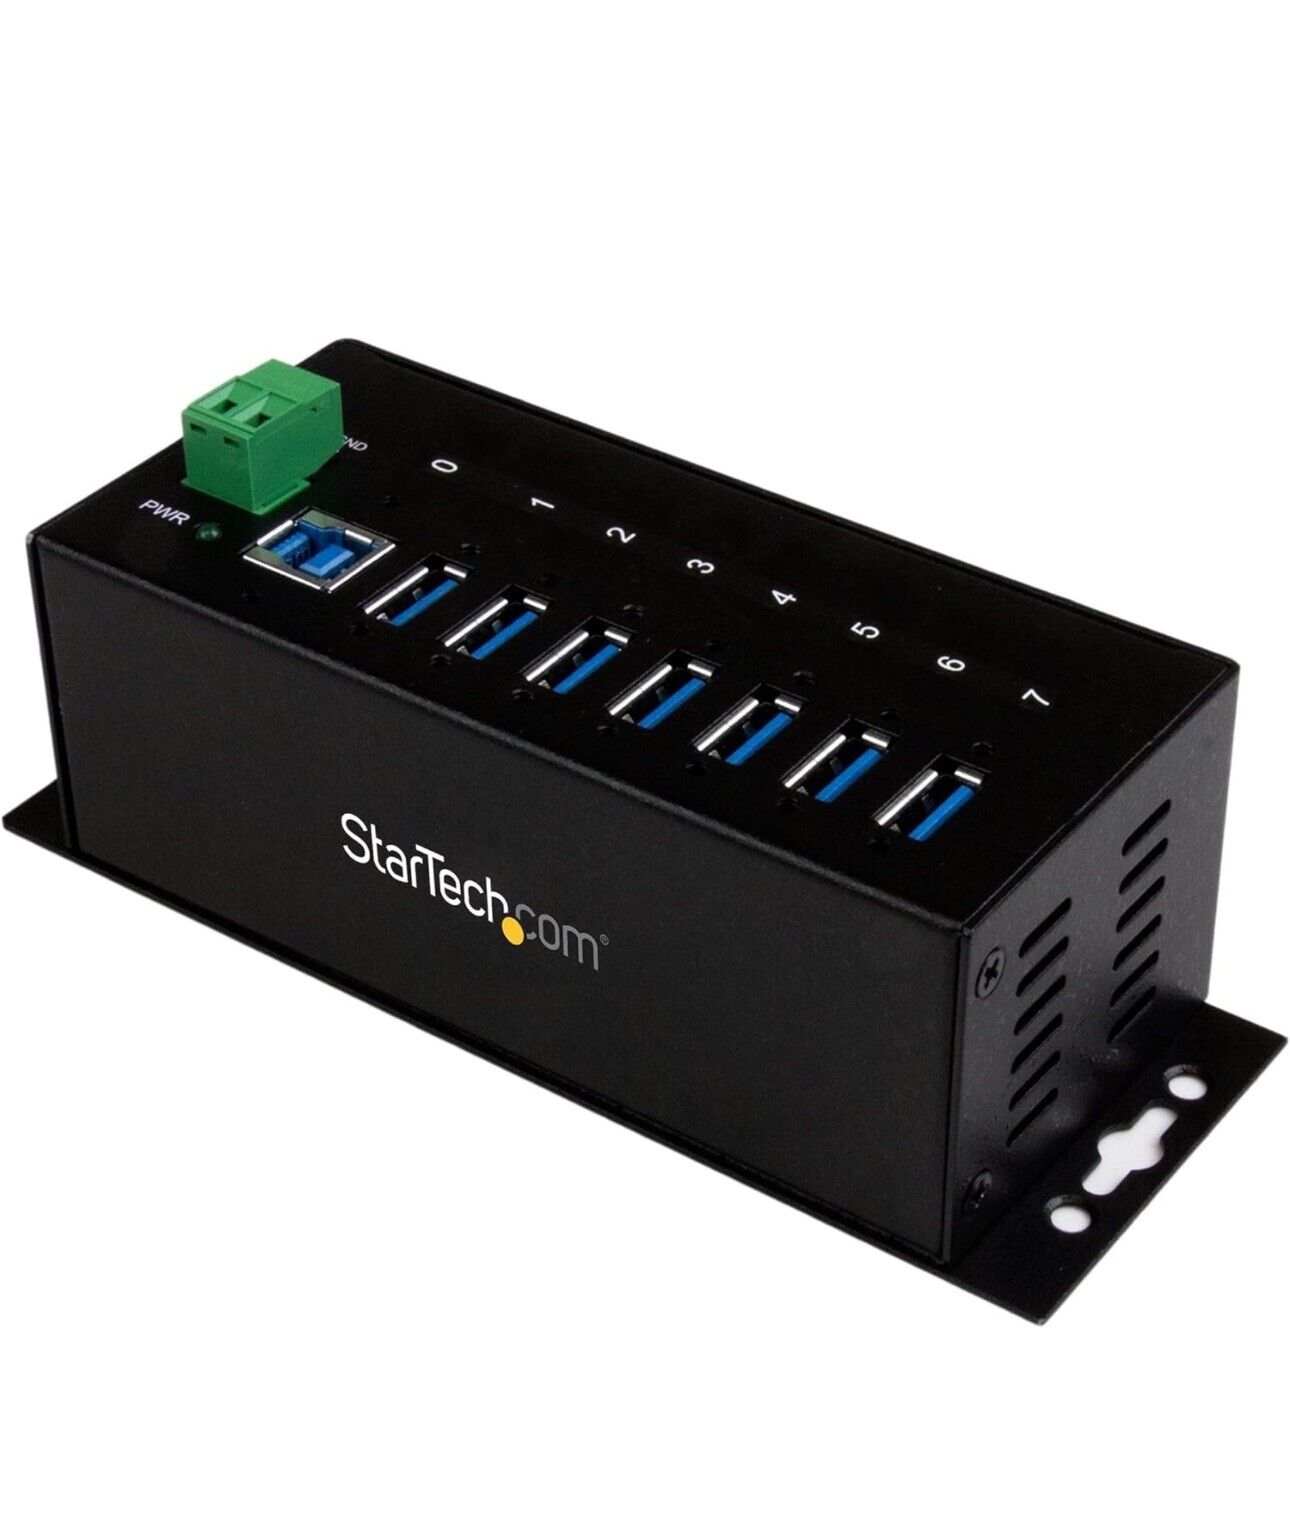 StarTech ST7300USBME 7 Port Industrial USB 3.0 Hub  with ESD Protection